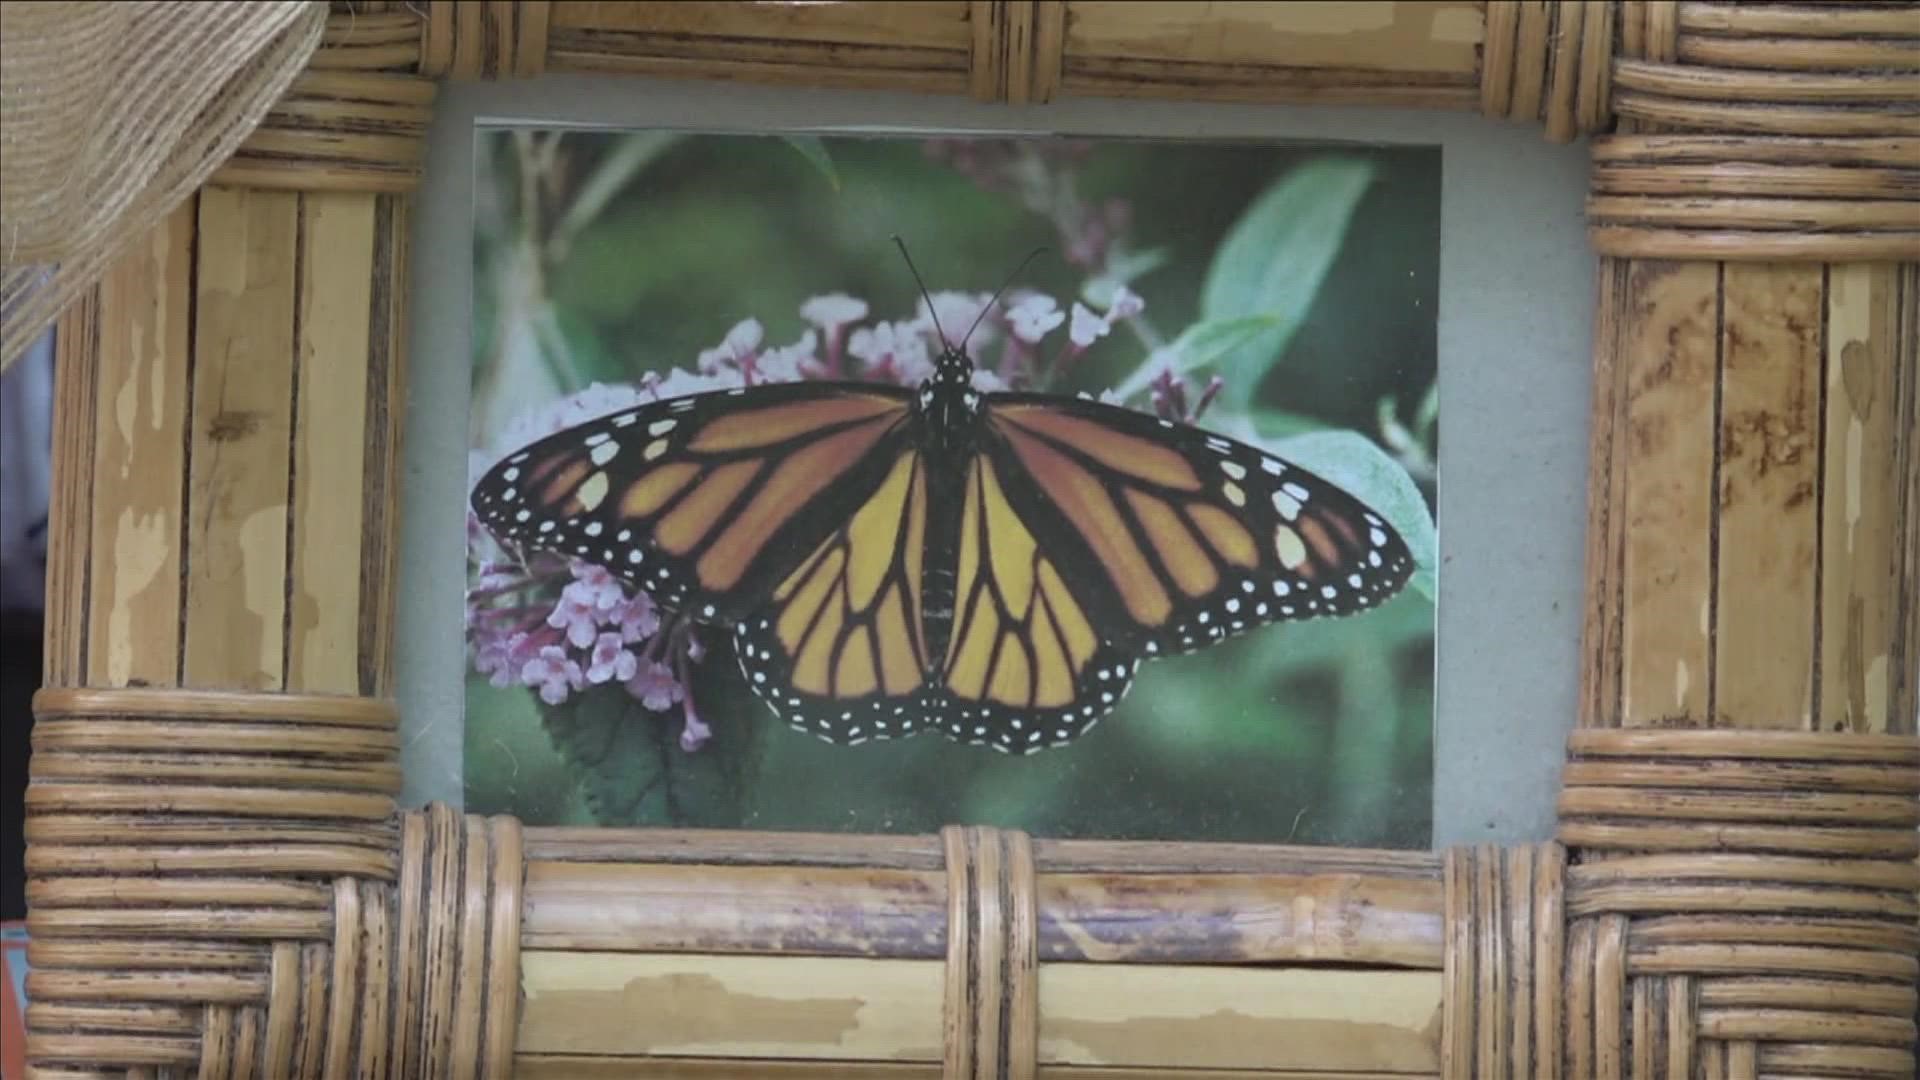 Mississippi Wildlife Rehabilitation held an event at ARK Trails in Hernando called ‘Mississippi for the Monarch,’ aimed at helping monarch butterflies.